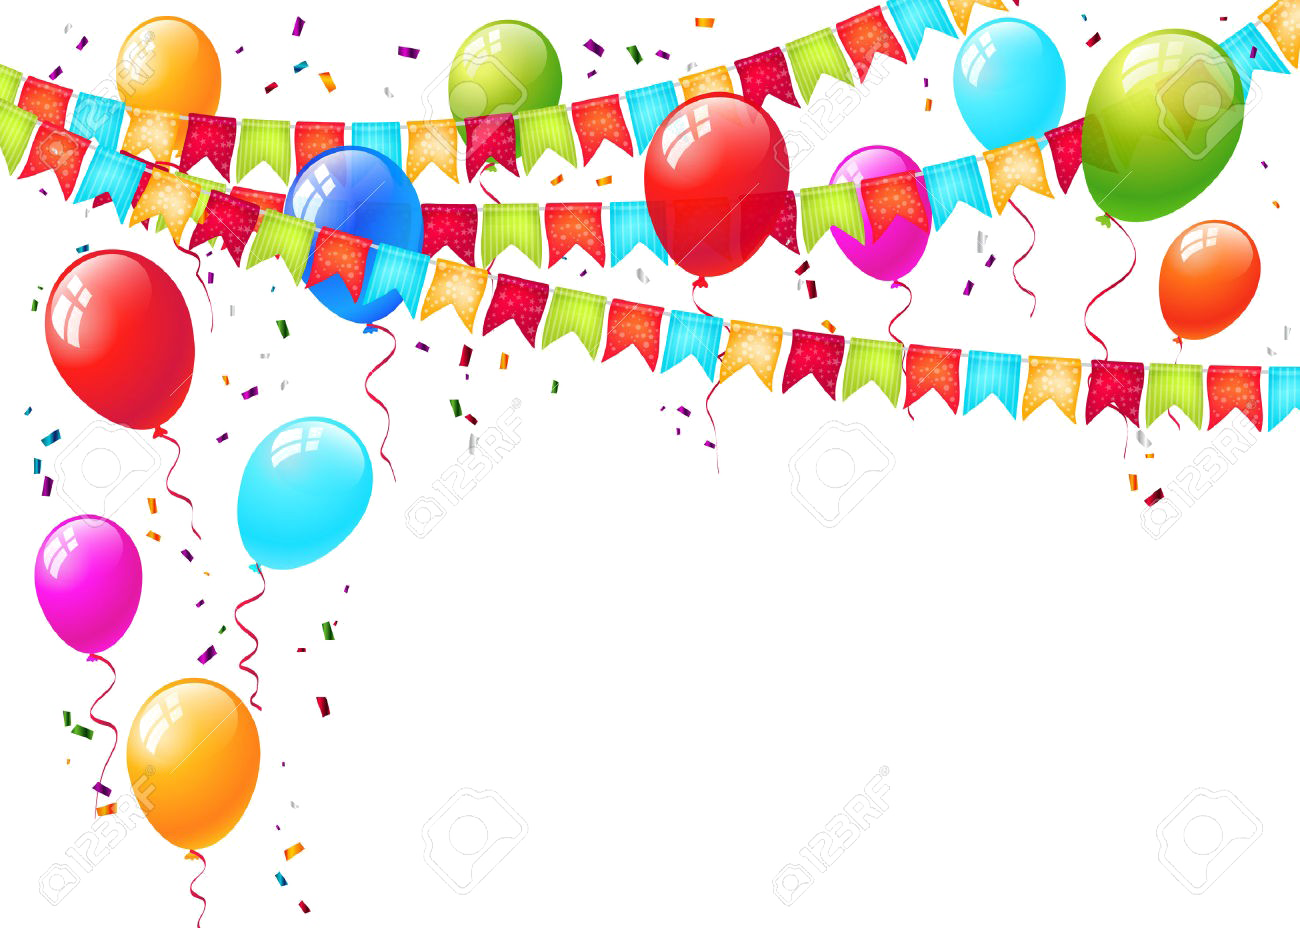 Festive Balloonsand Banners Background PNG image